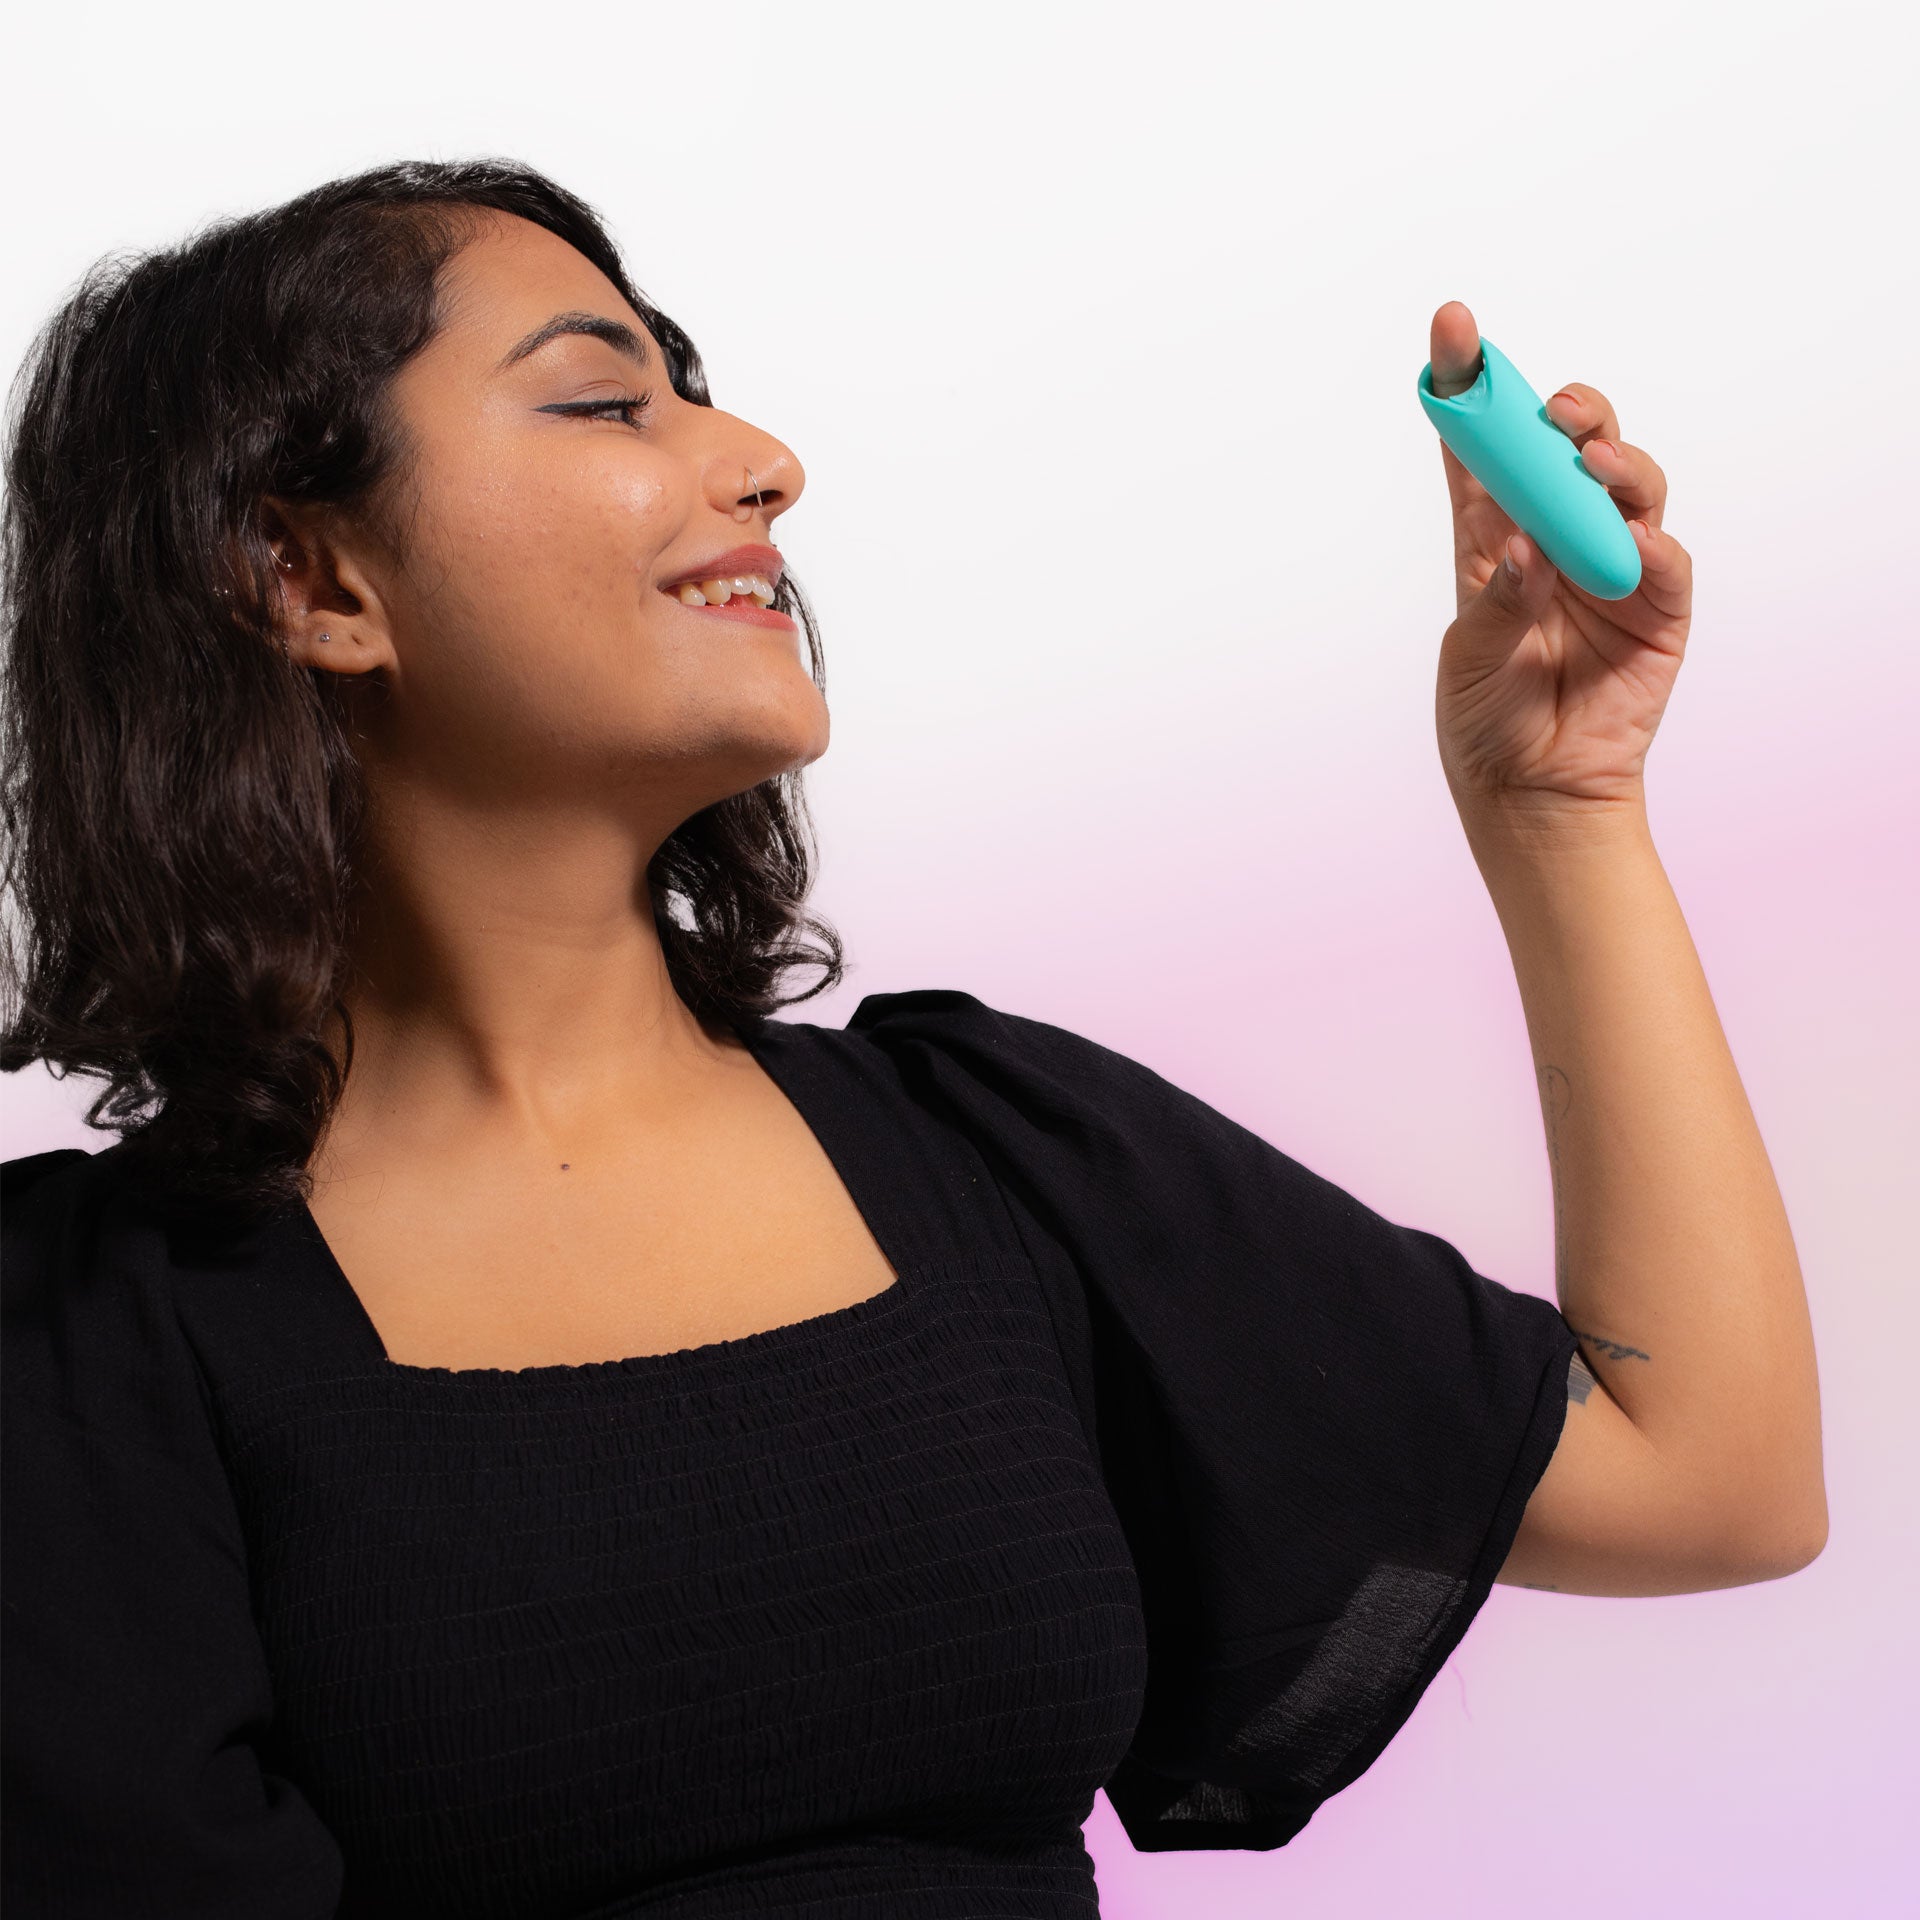 Woman Demonstrating Bubbly Blue Candy Personal Massager